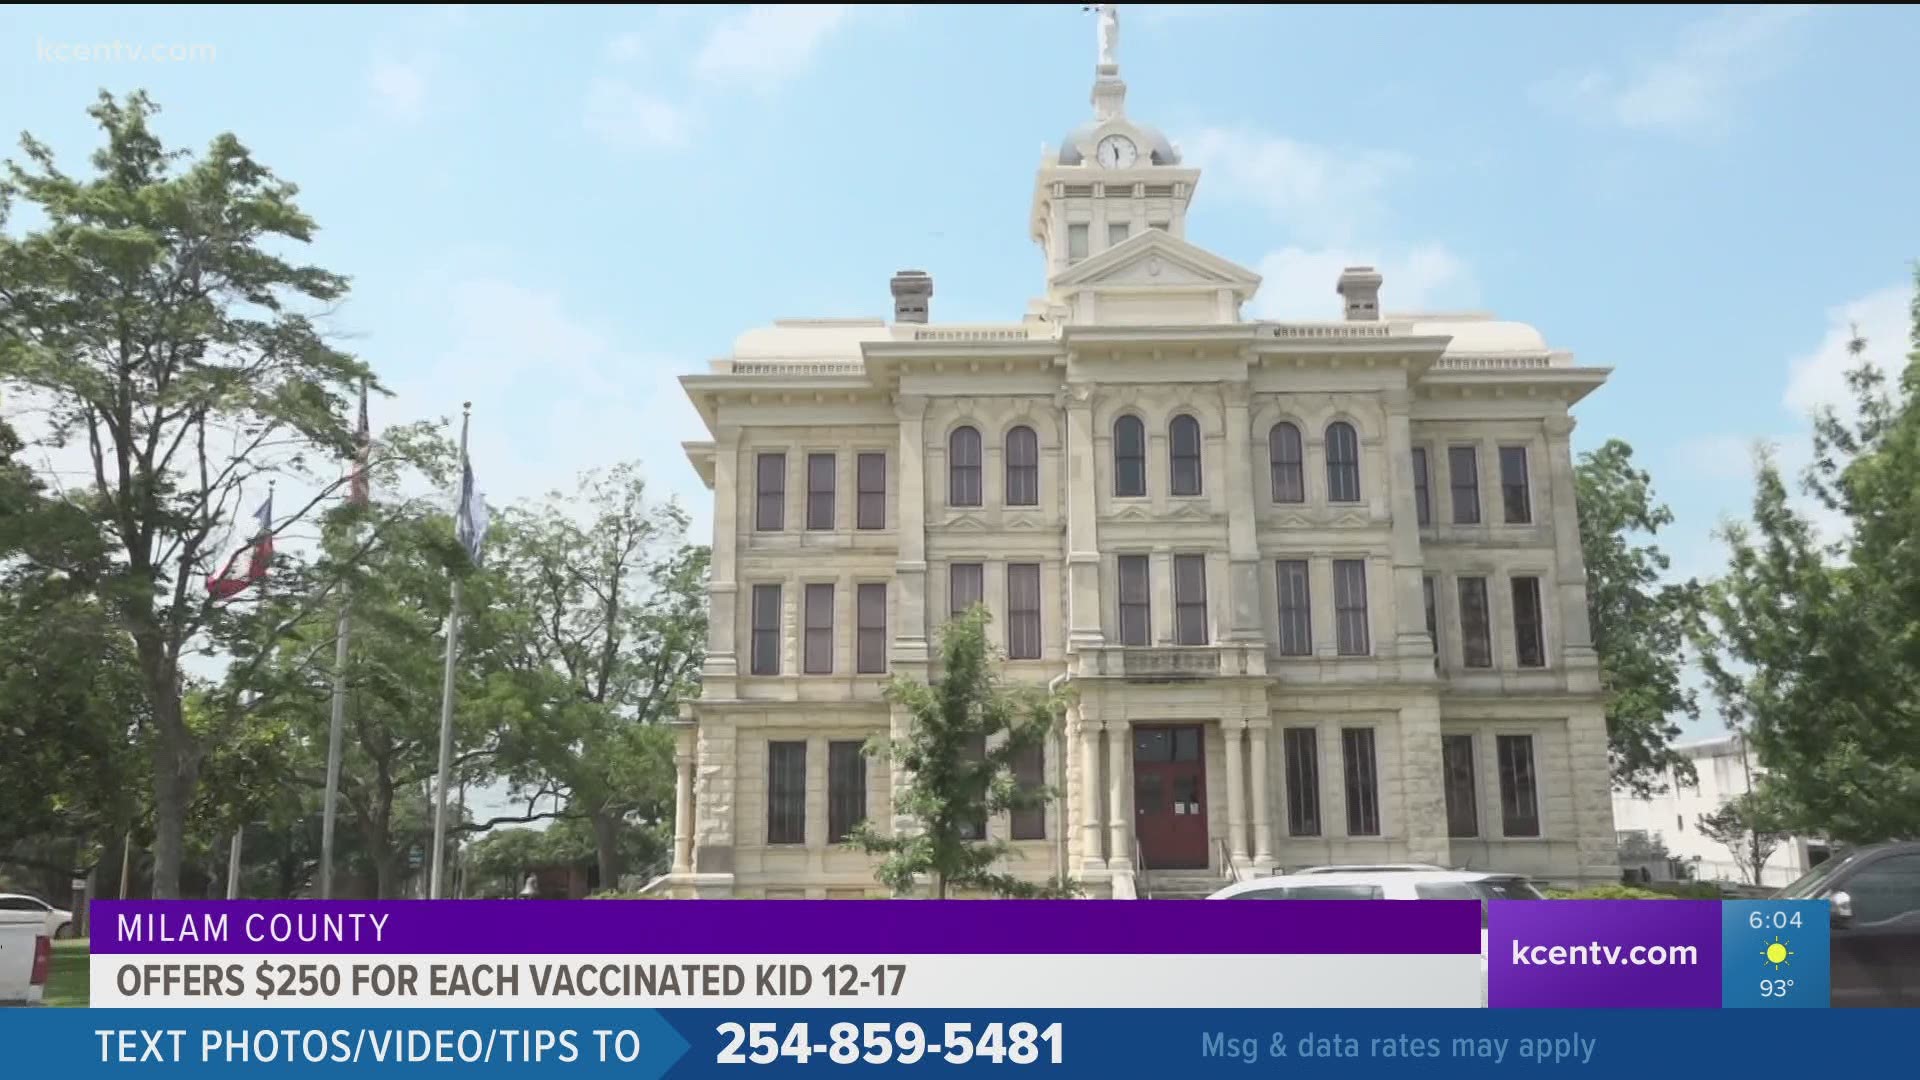 The county said it is offering $250 per child after they receive both doses.